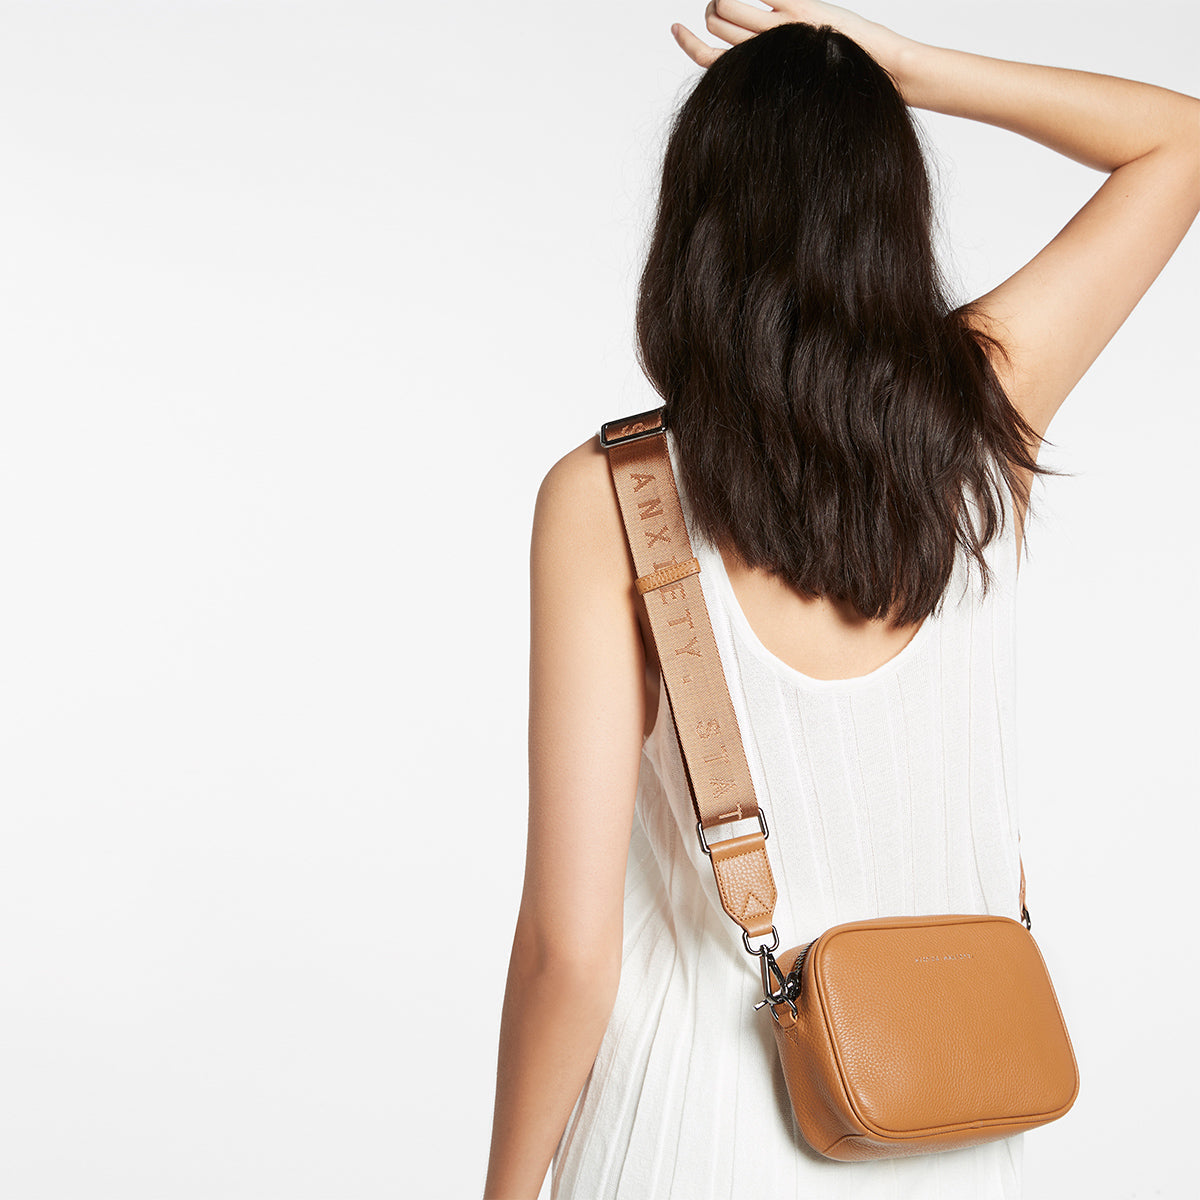 Status Anxiety Tan Web Strap for Plunder Bag